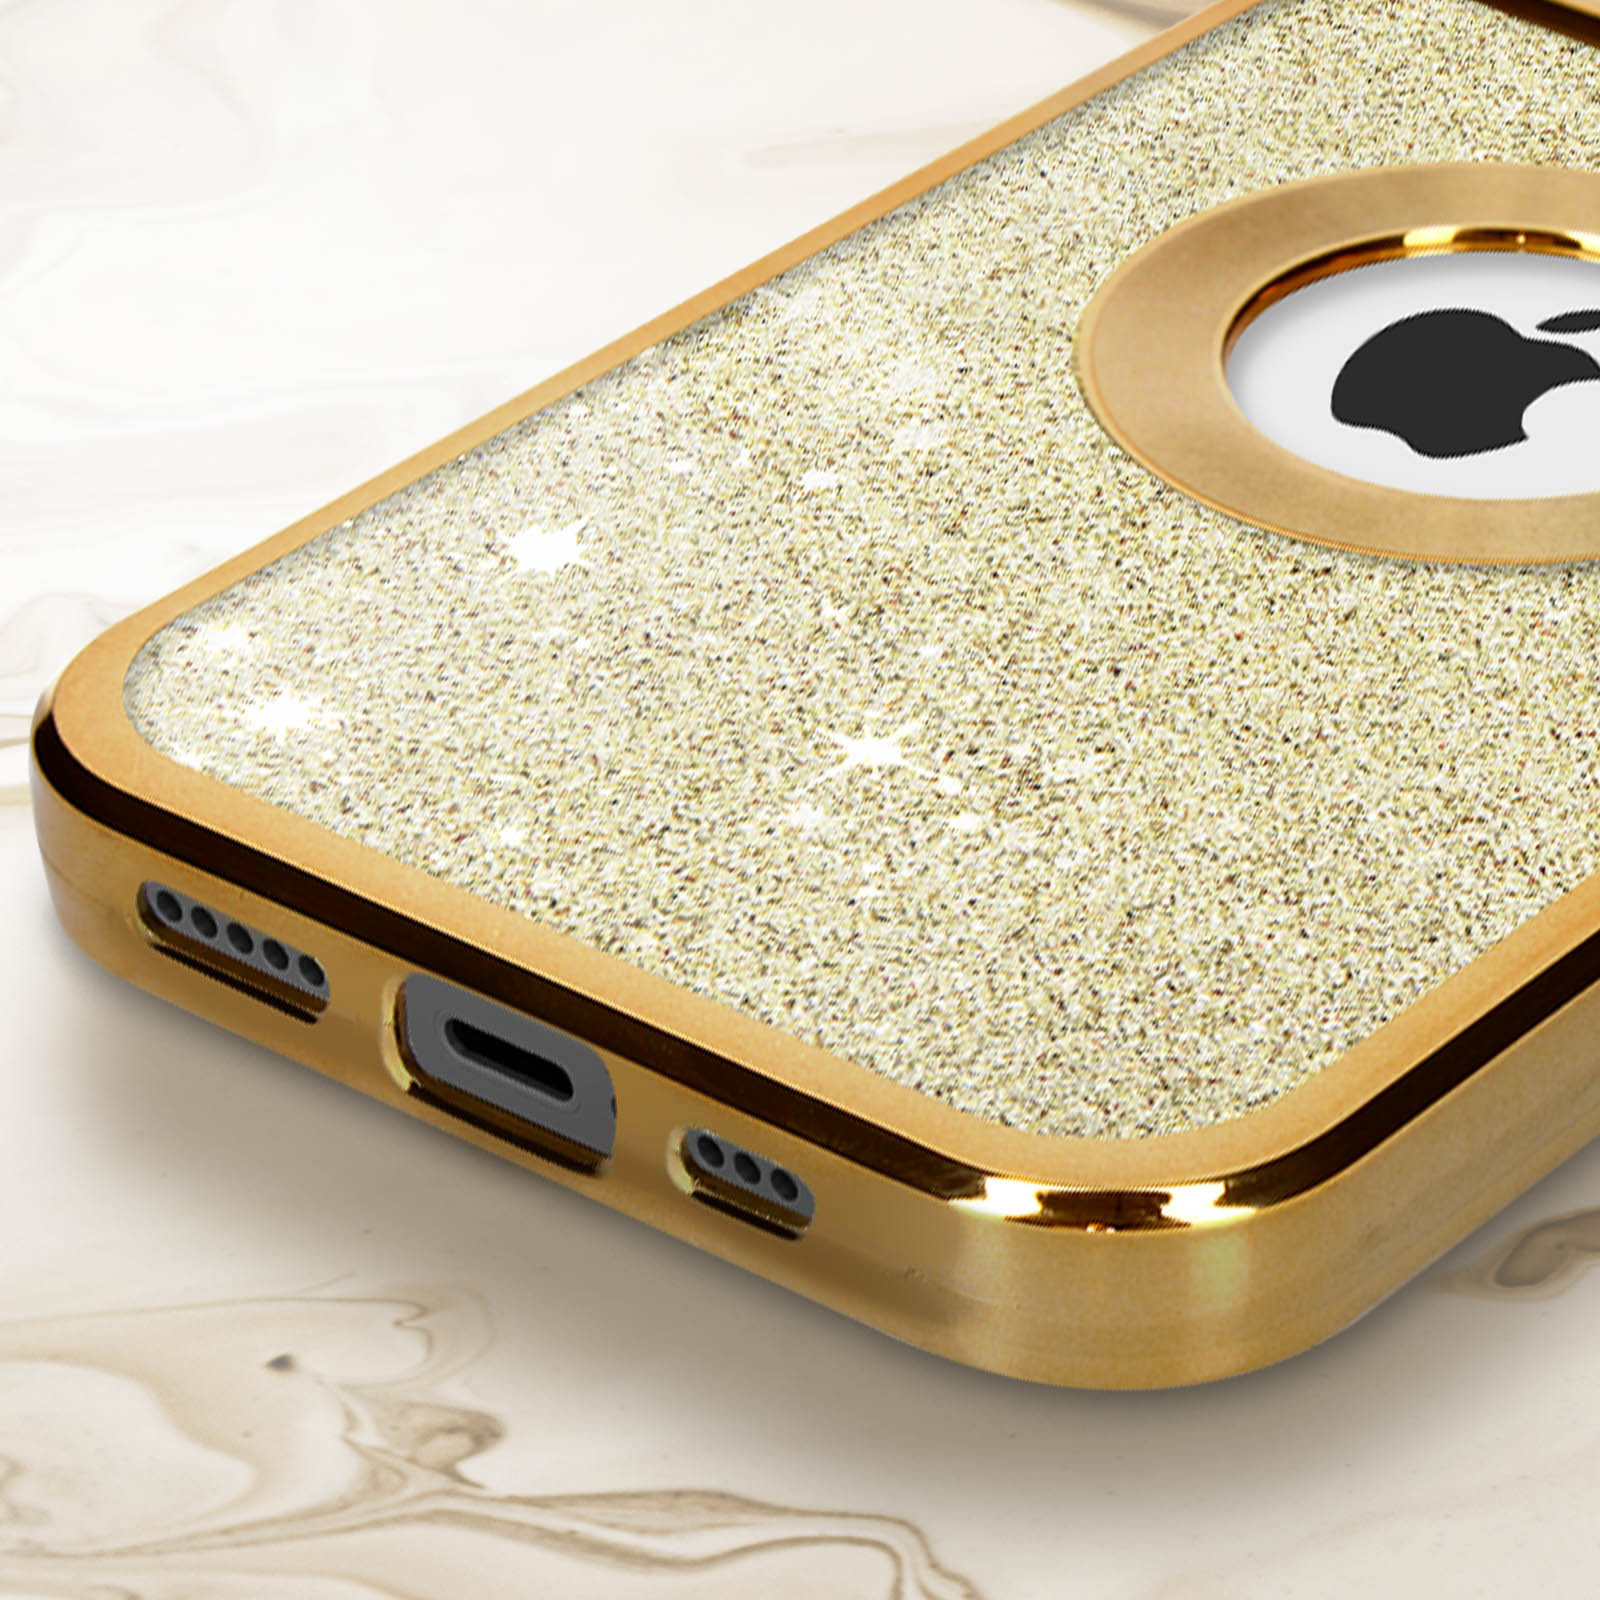 Backcover, Spark Apple, Series, Protecam Pro, iPhone 12 Gold AVIZAR